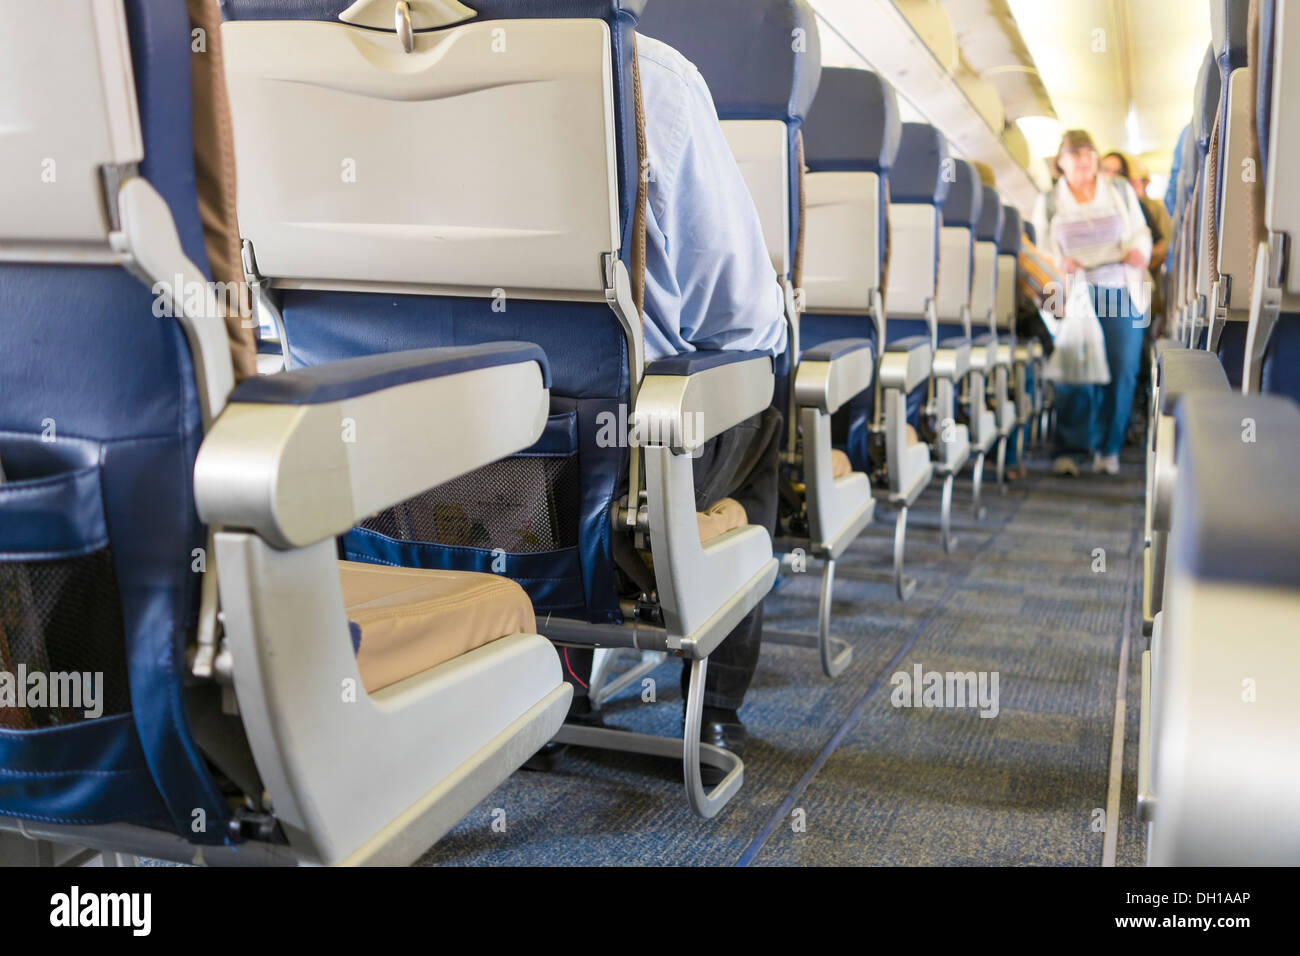 Passengers boarding airplane - interior of commercial airline carrier Stock Photo